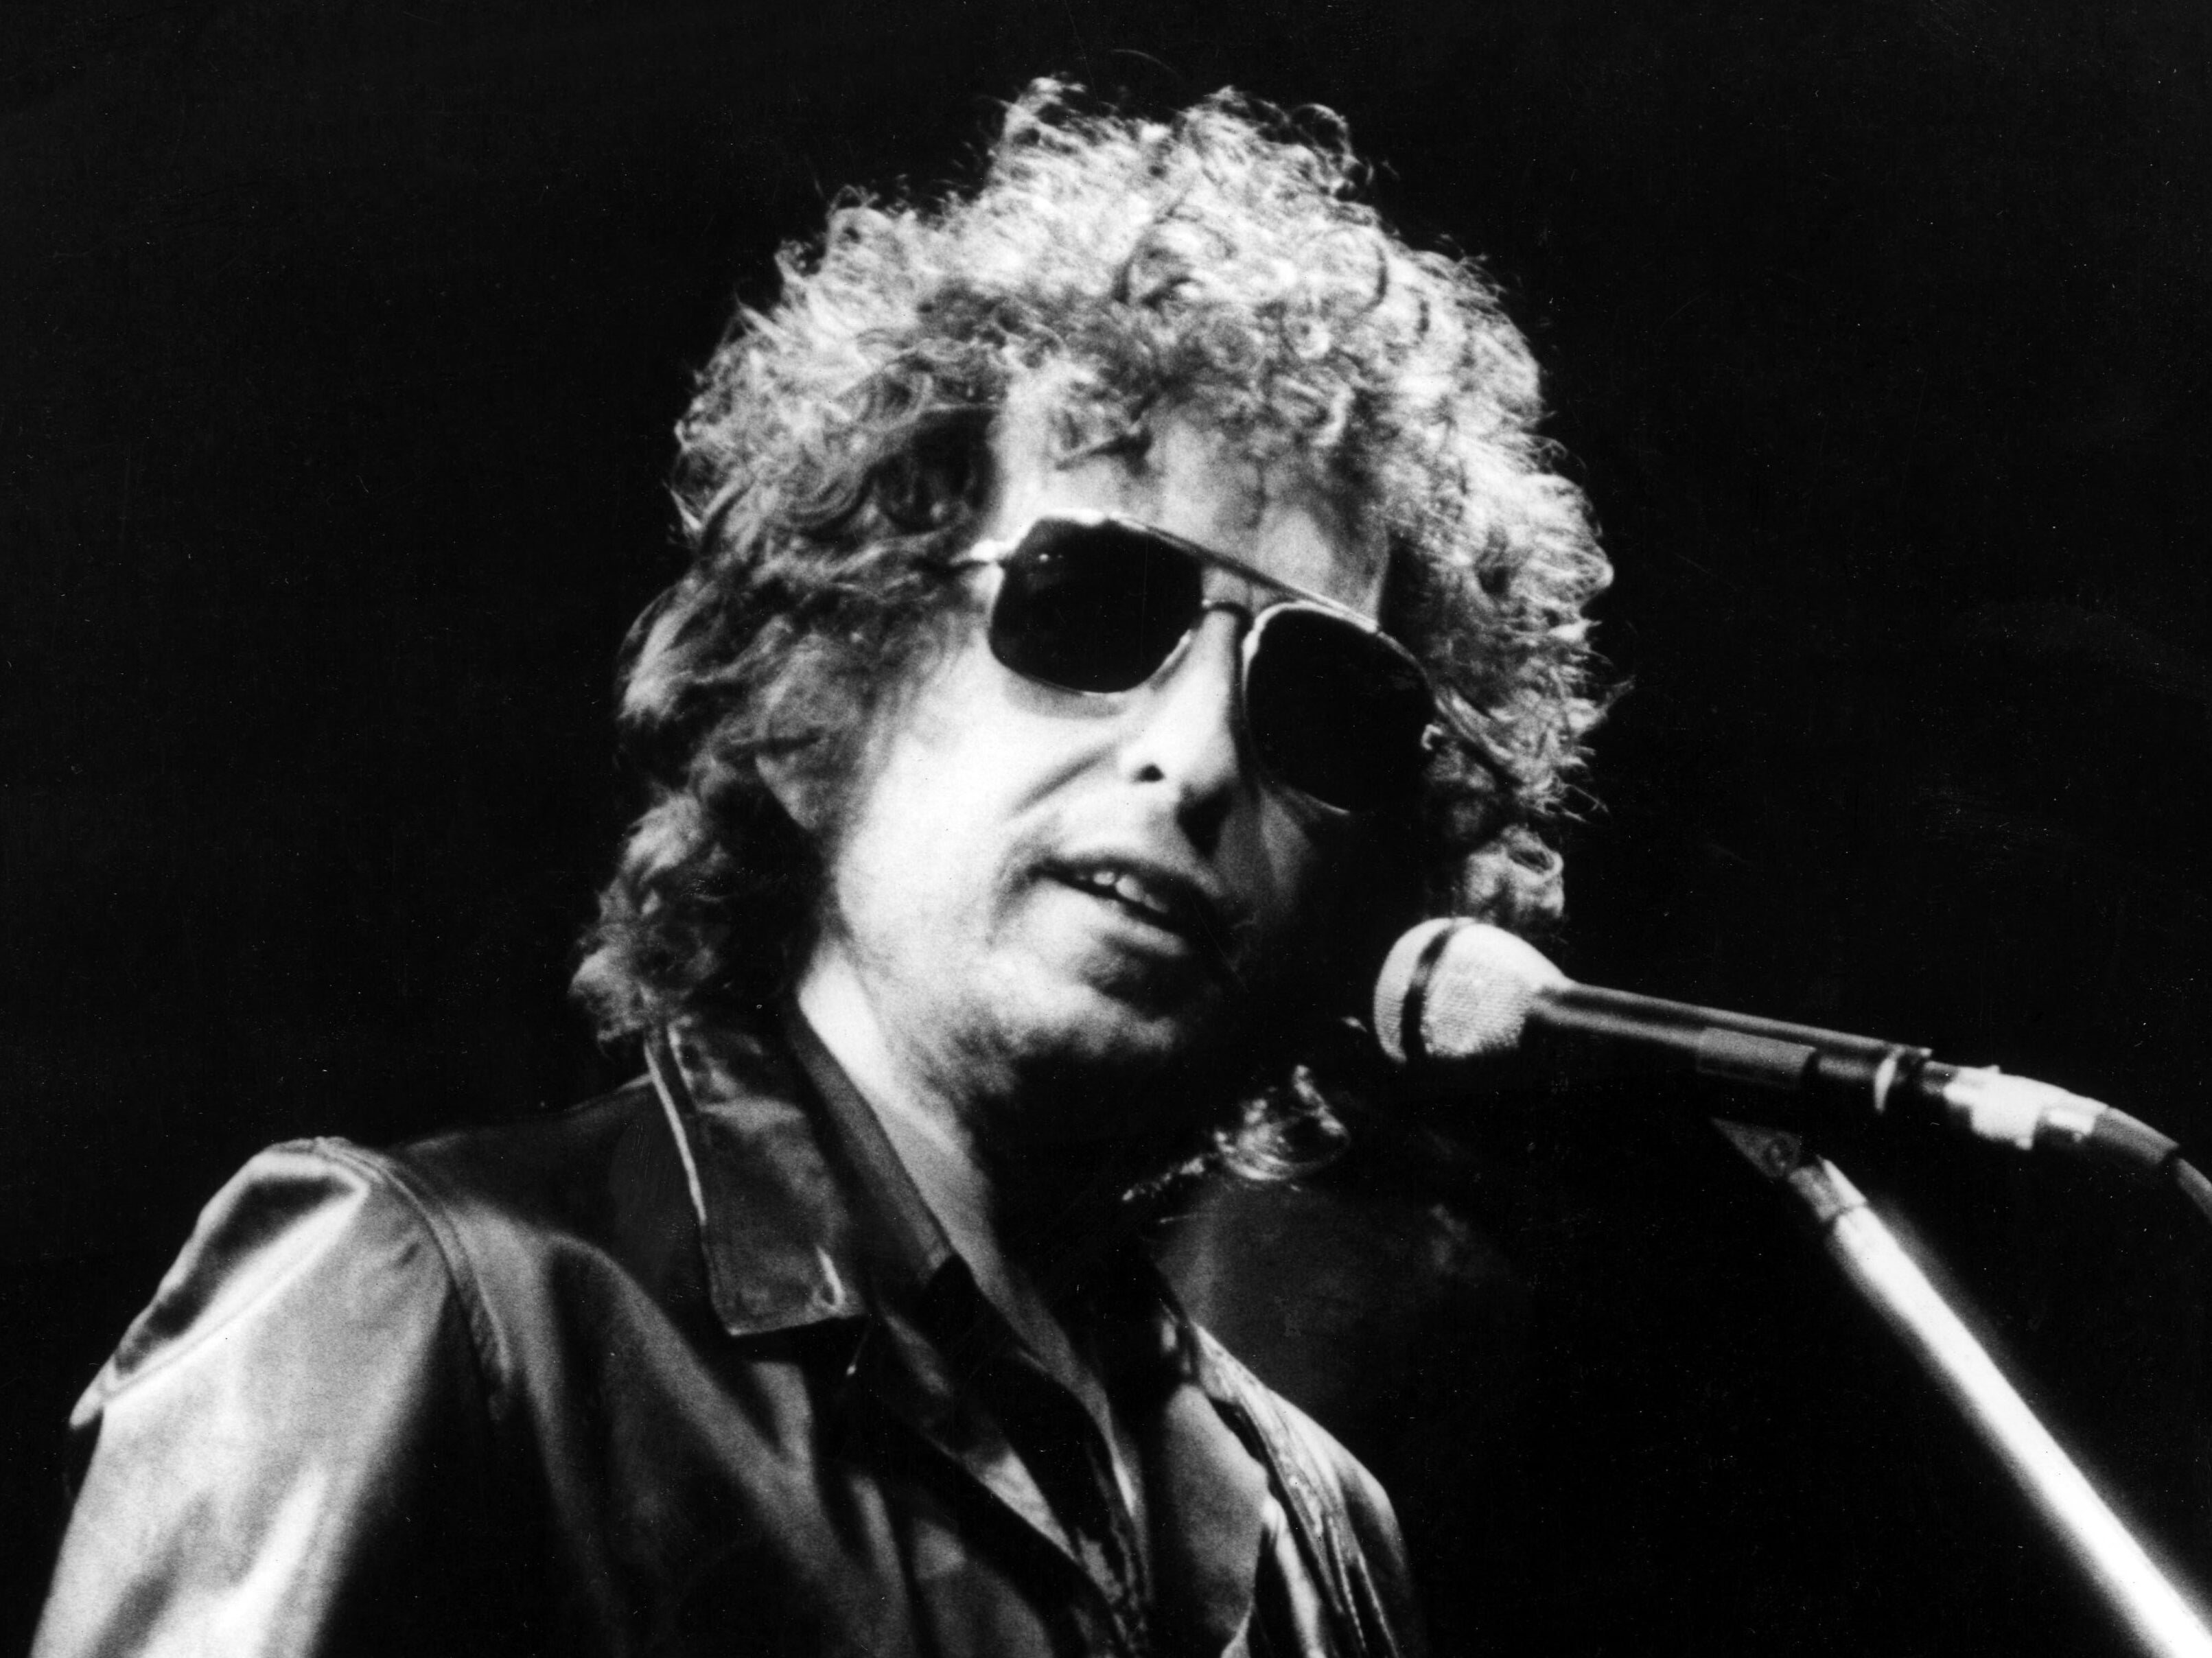 The interviews reveal that Dylan (pictured in 1981) wrote ‘Lay Lady Lay’ for Barbra Streisand